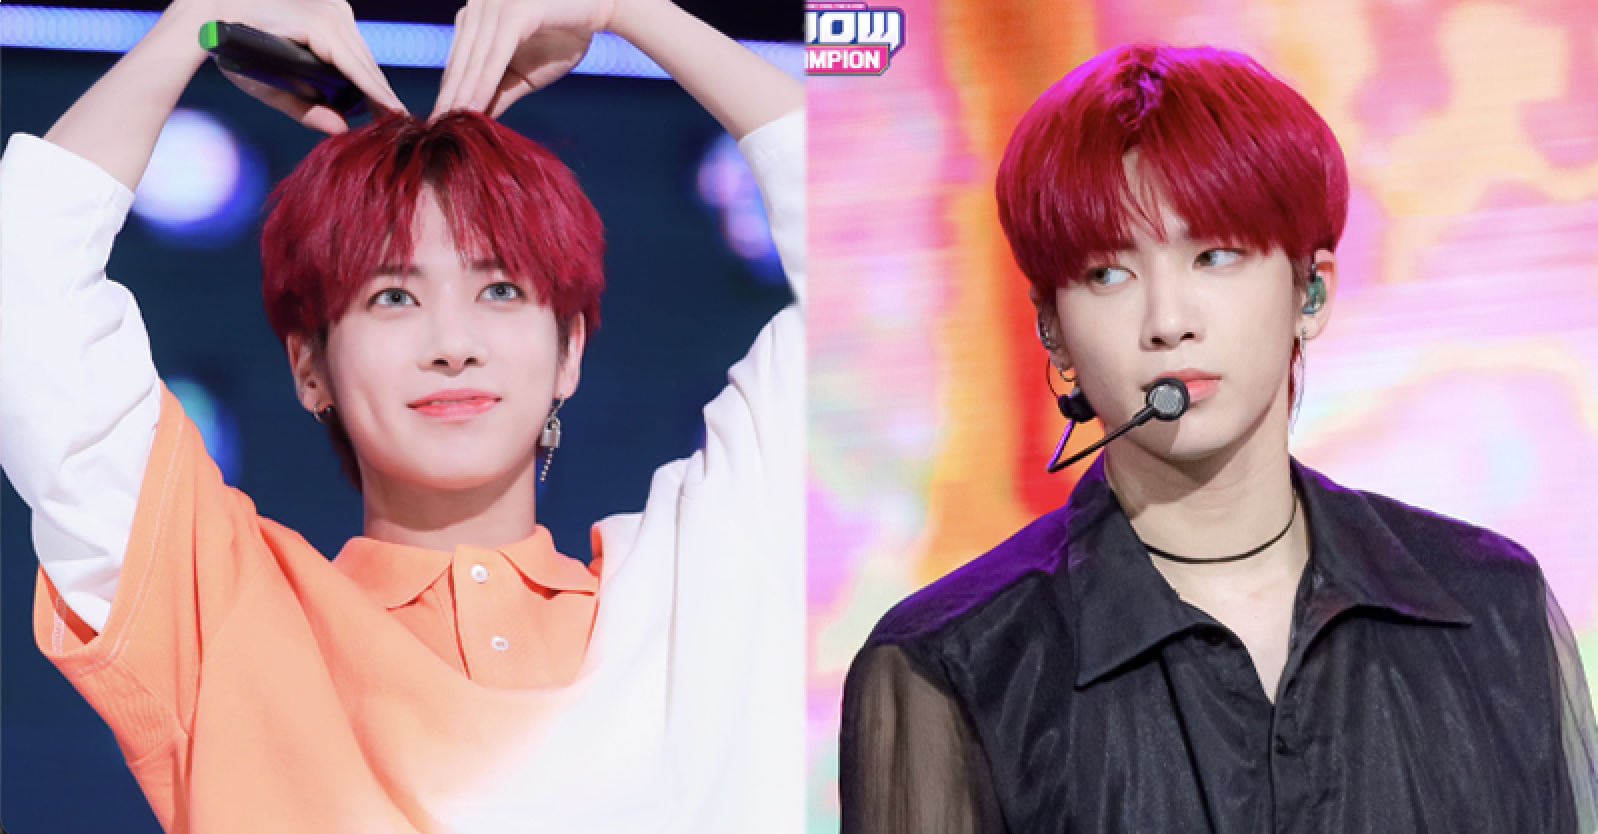 Top 5 Fancams of TXT's TaeHyun That Make Fans' Heart Dropped